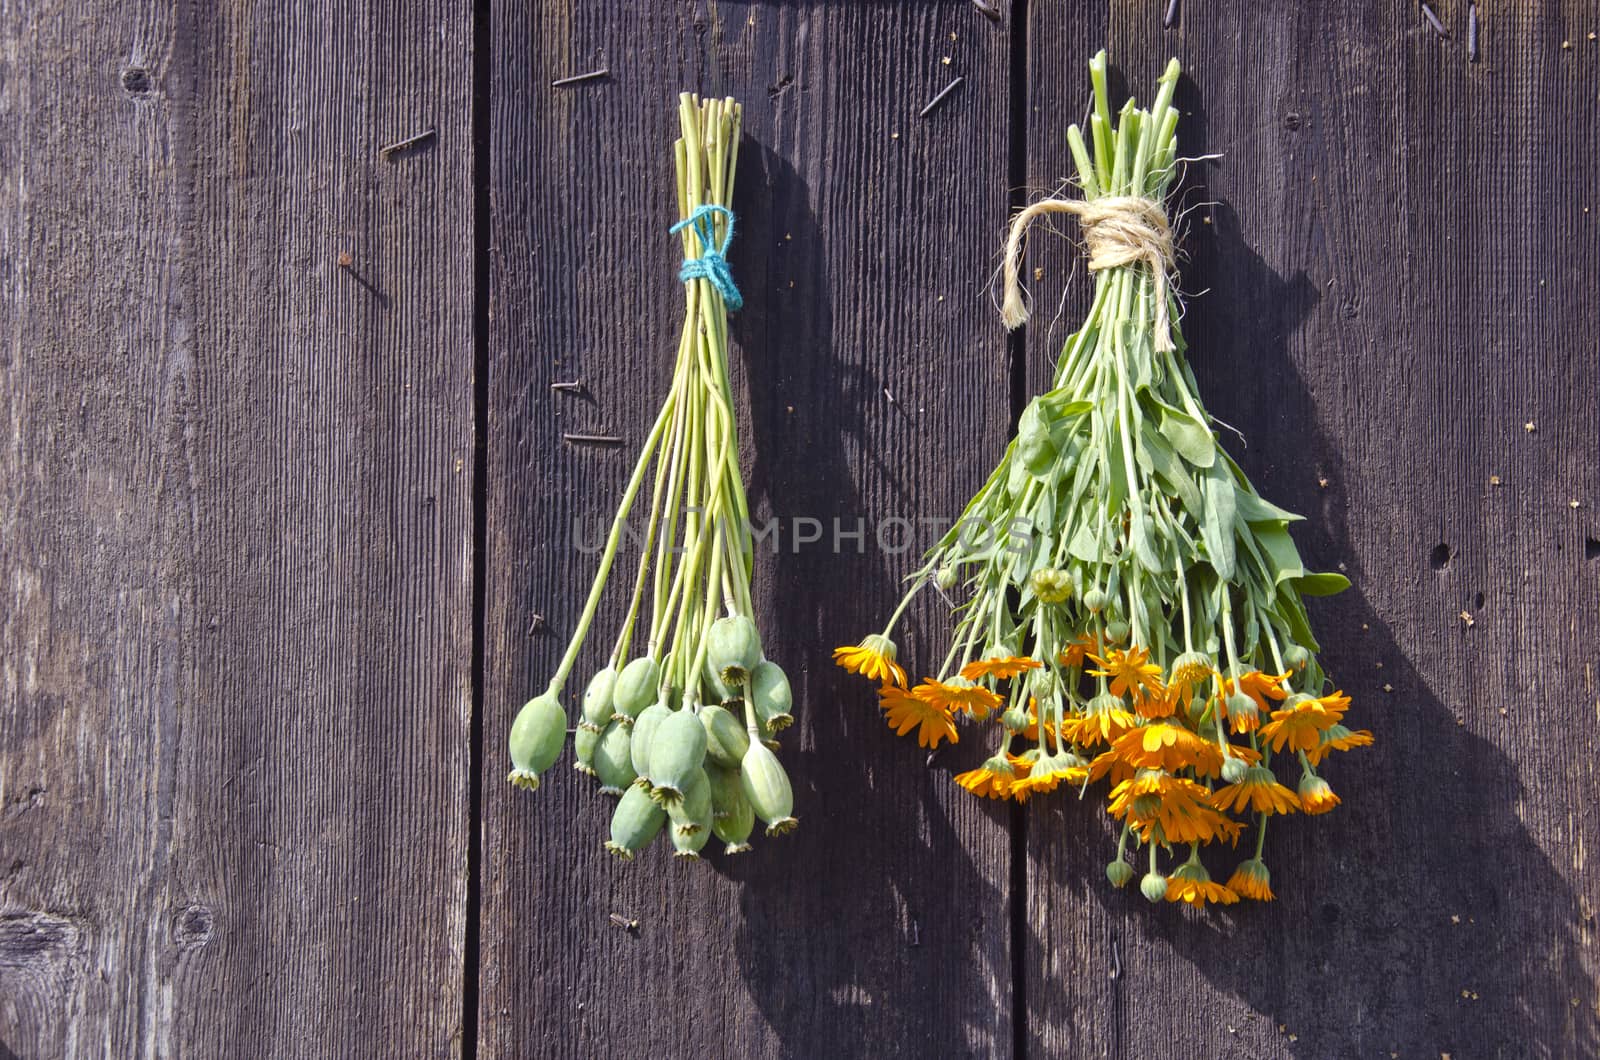 Bundles of fresh herbs hanged to dry outside on a wooden wall  